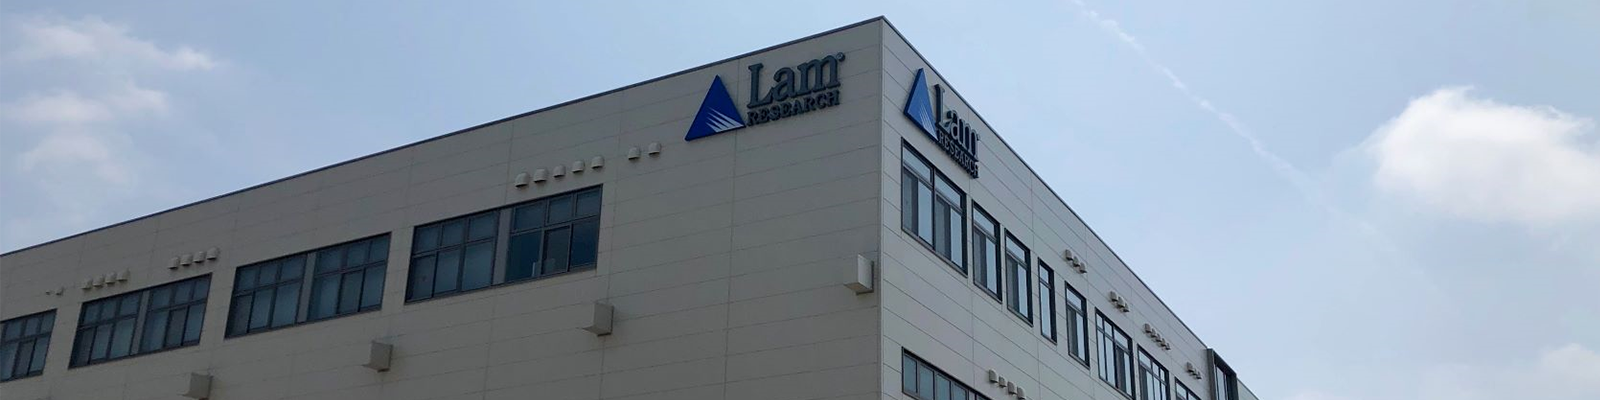 Large corporate building displaying the text Lam Research